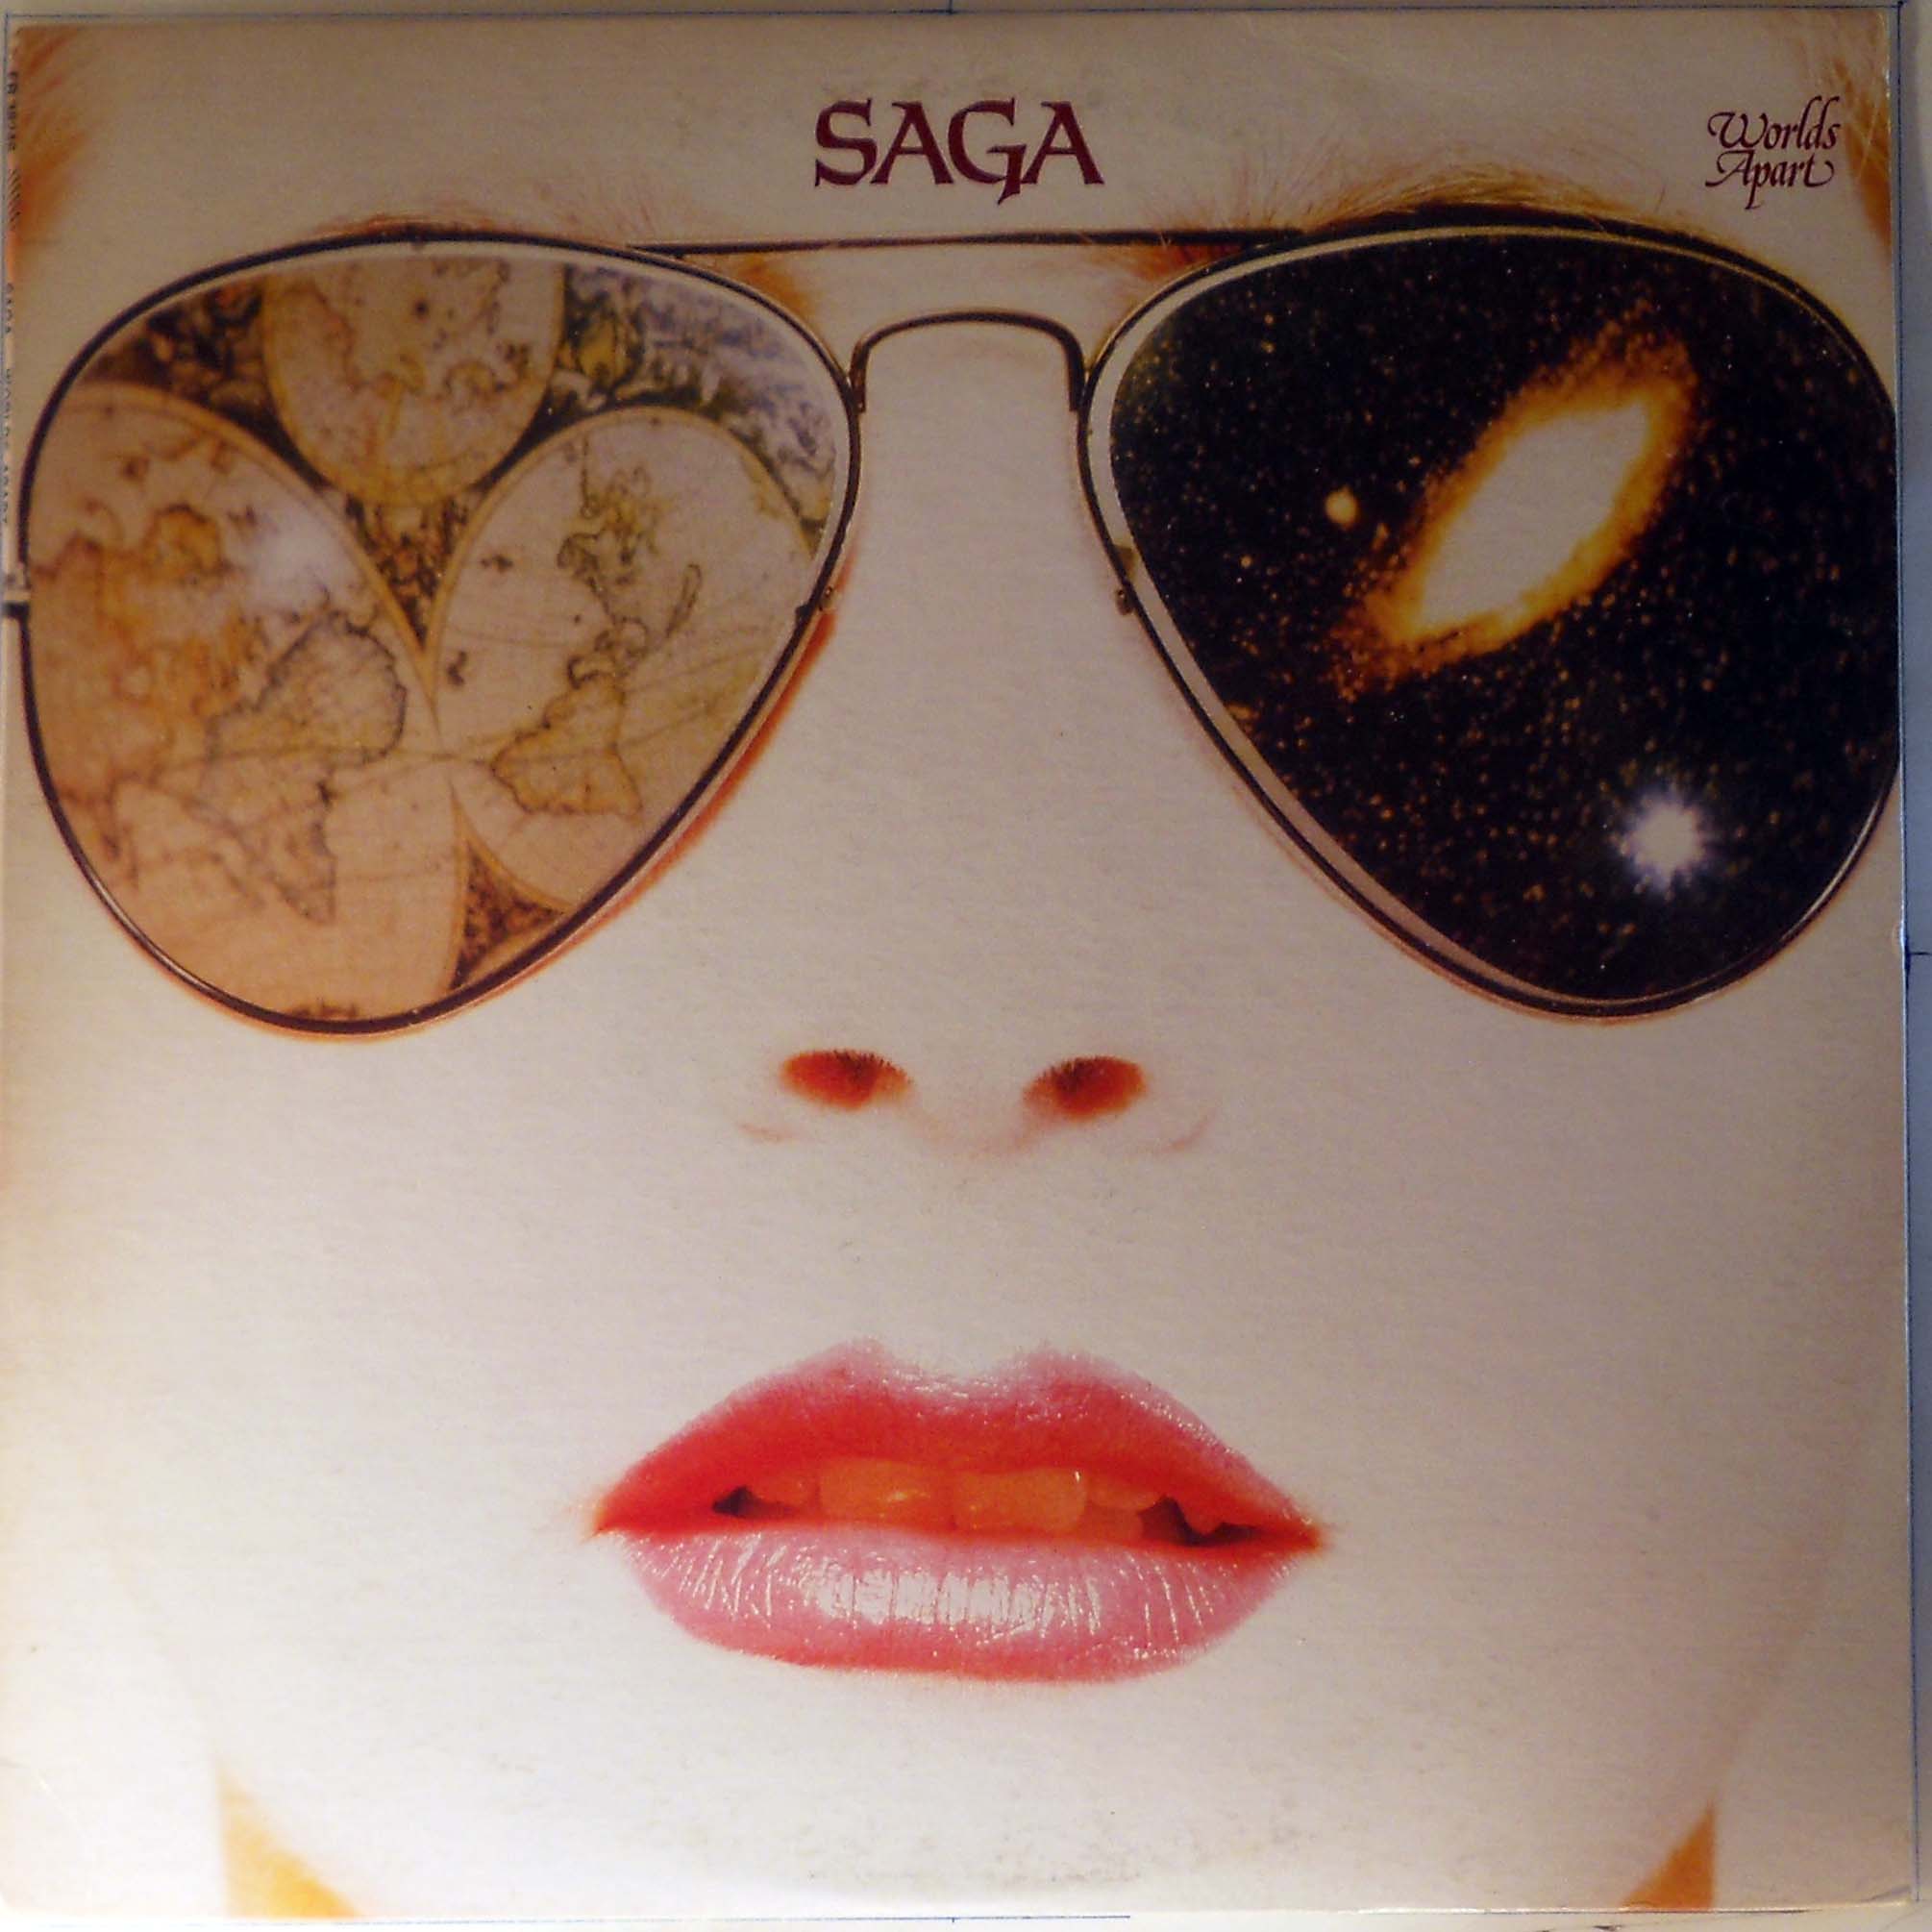 Saga Worlds Apart Records, LPs, Vinyl and CDs - MusicStack